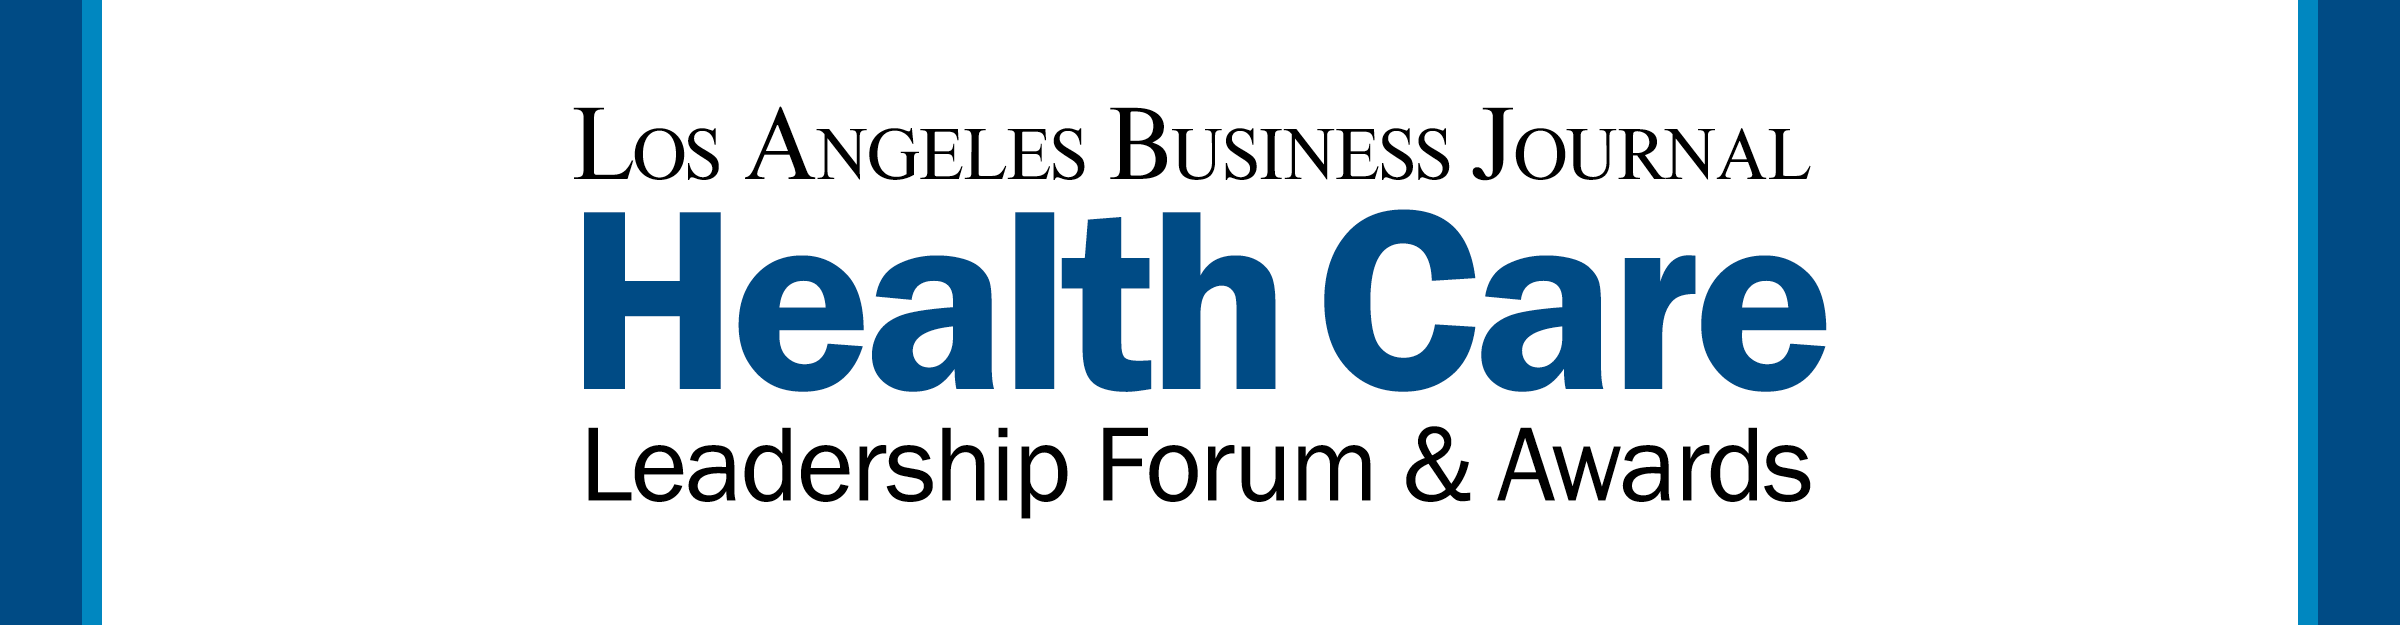 Los Angeles Business Journal Health Care Leadership Forum & Awards Event Banner